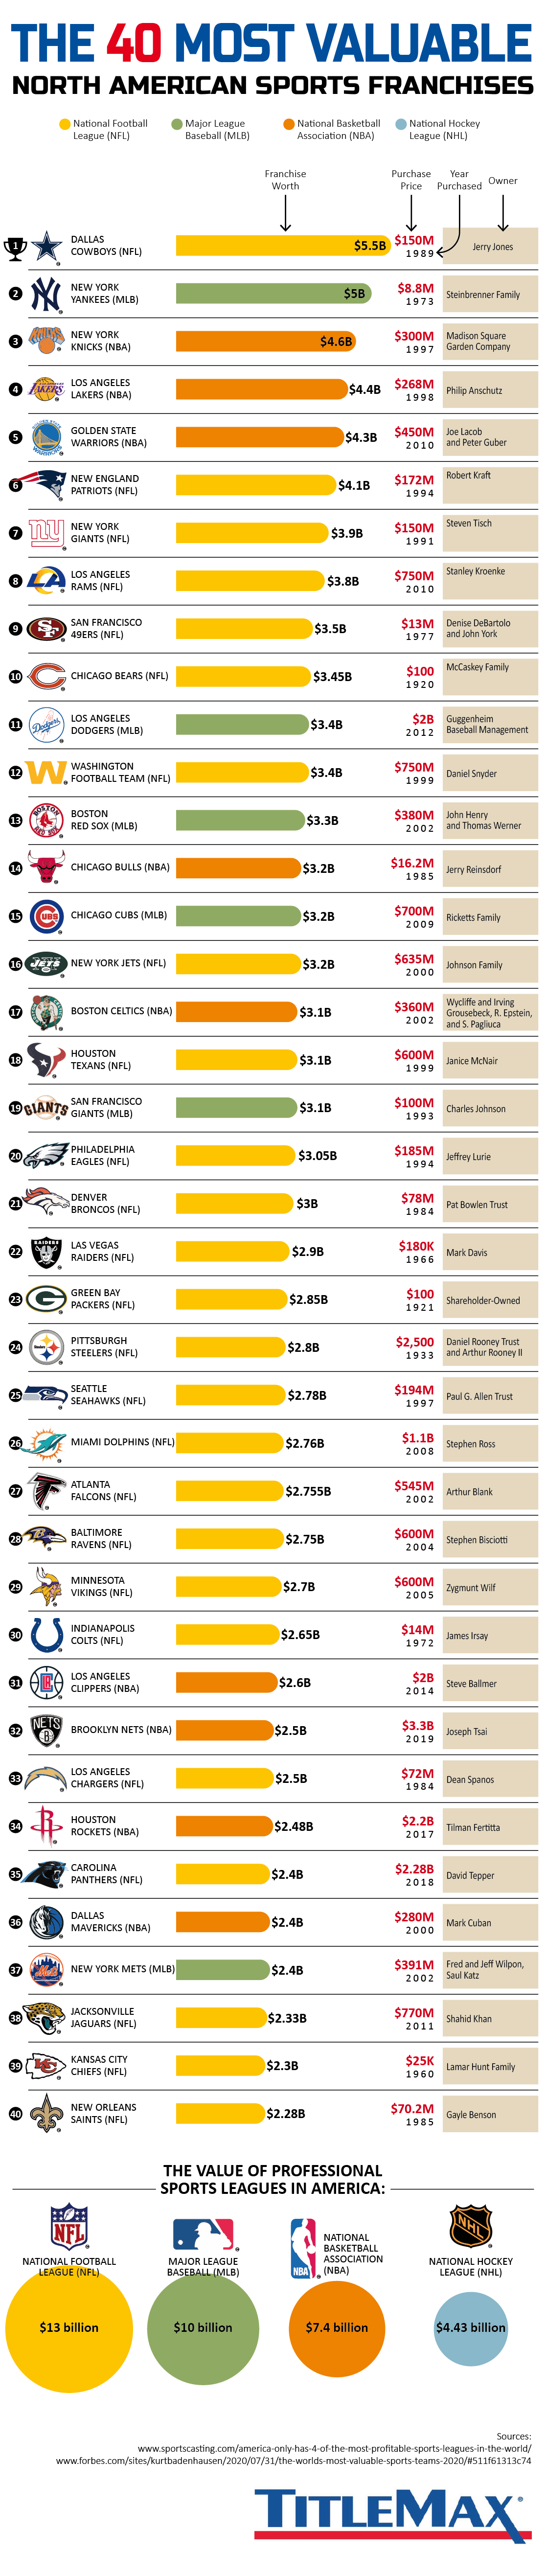 The 40 Most-Valuable North American Sports Franchises